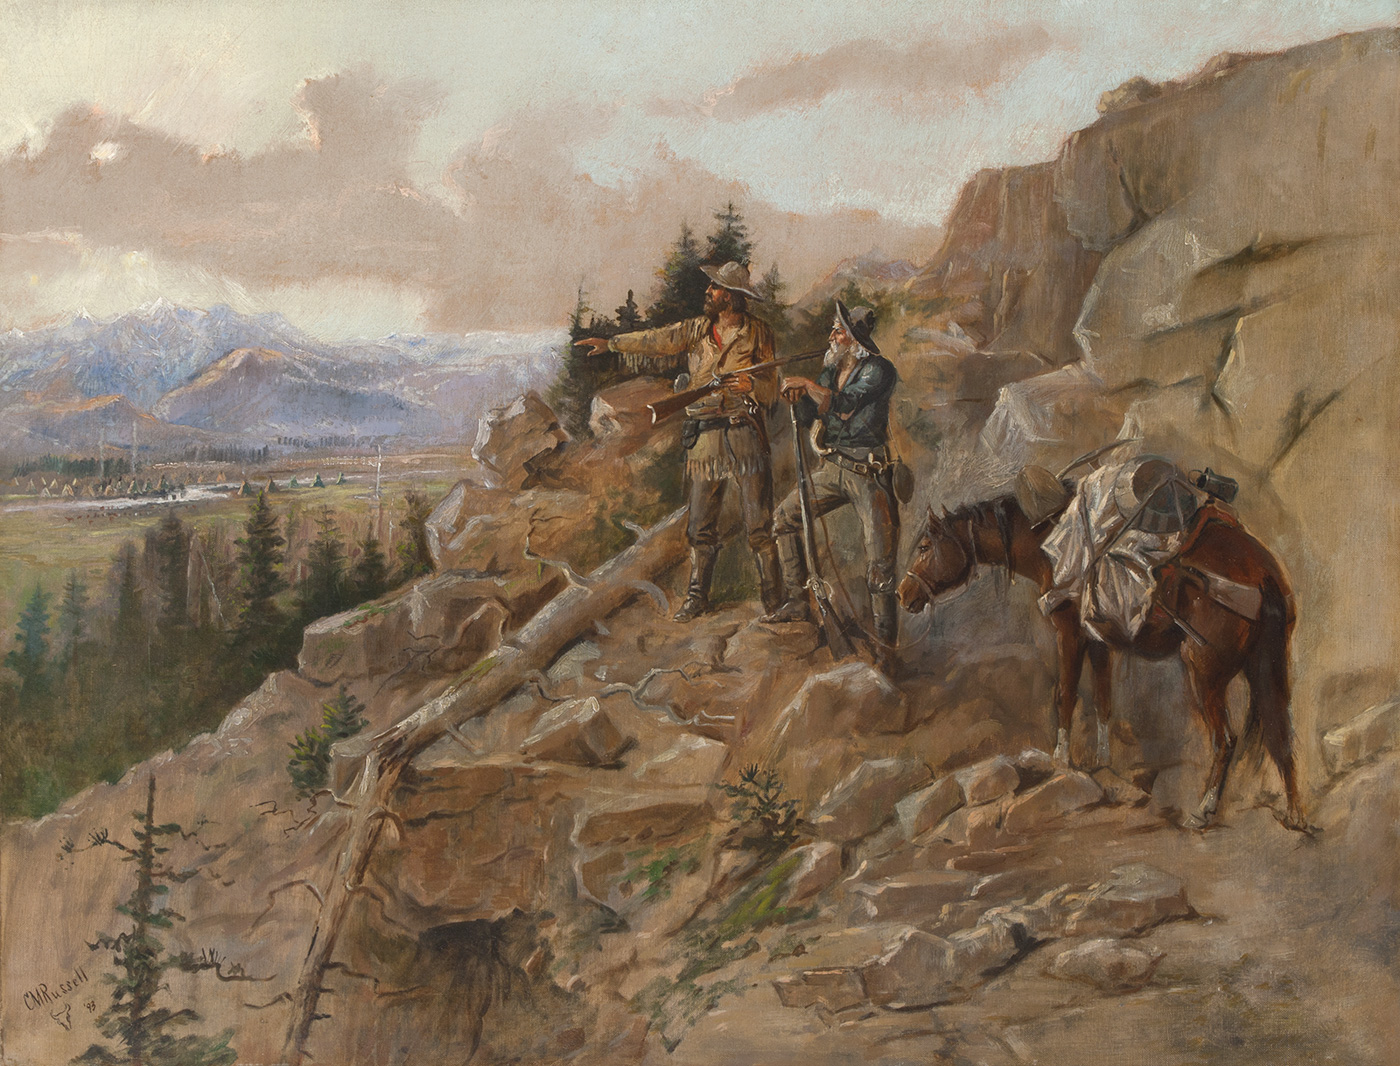 Two Anglo men with a mule on a mountain slope look out onto an indigenous American village.